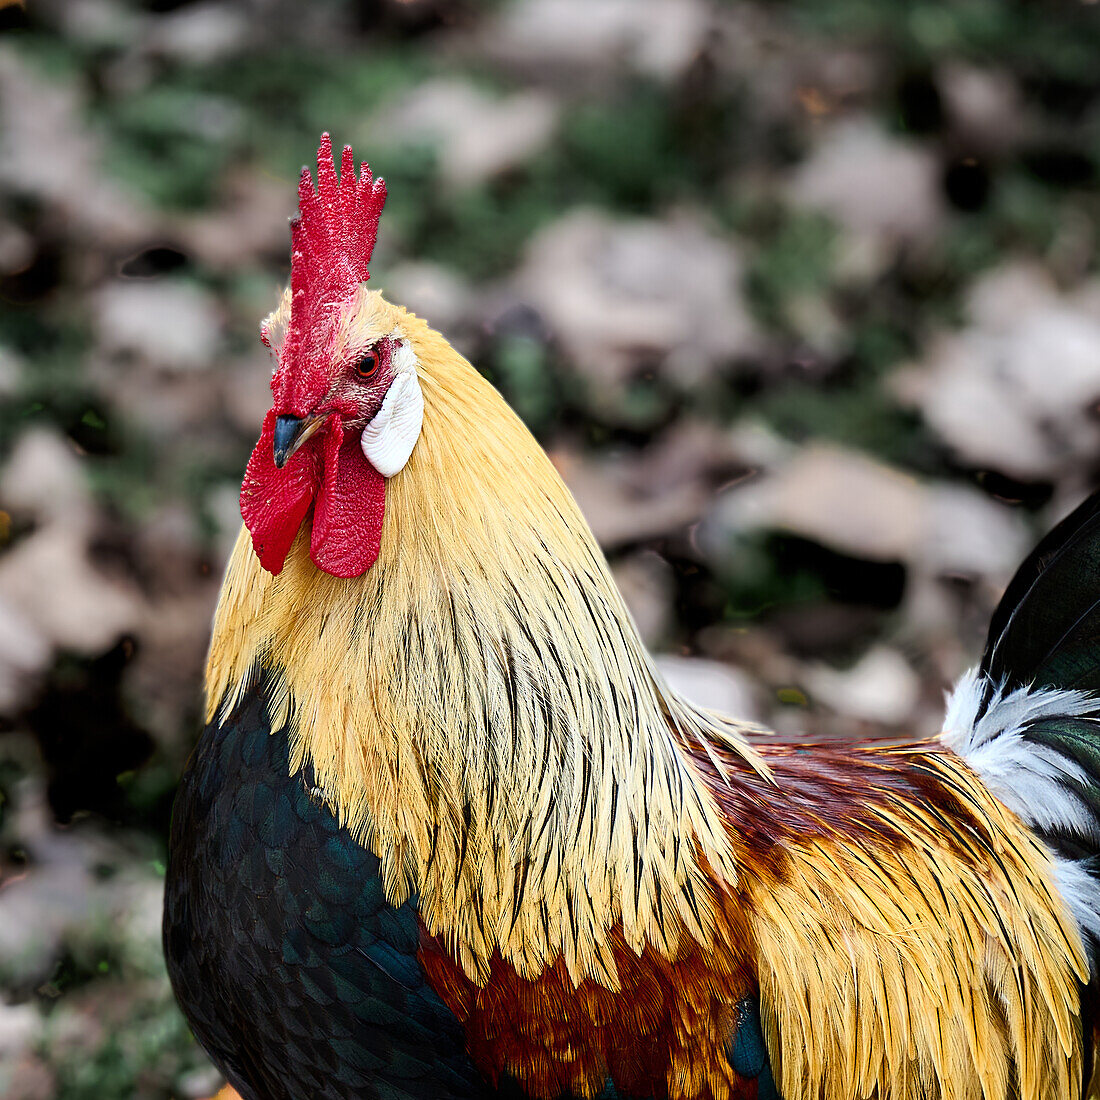 Proud rooster with a steady gaze, Unkel, Rhineland-Palatinate, Germany